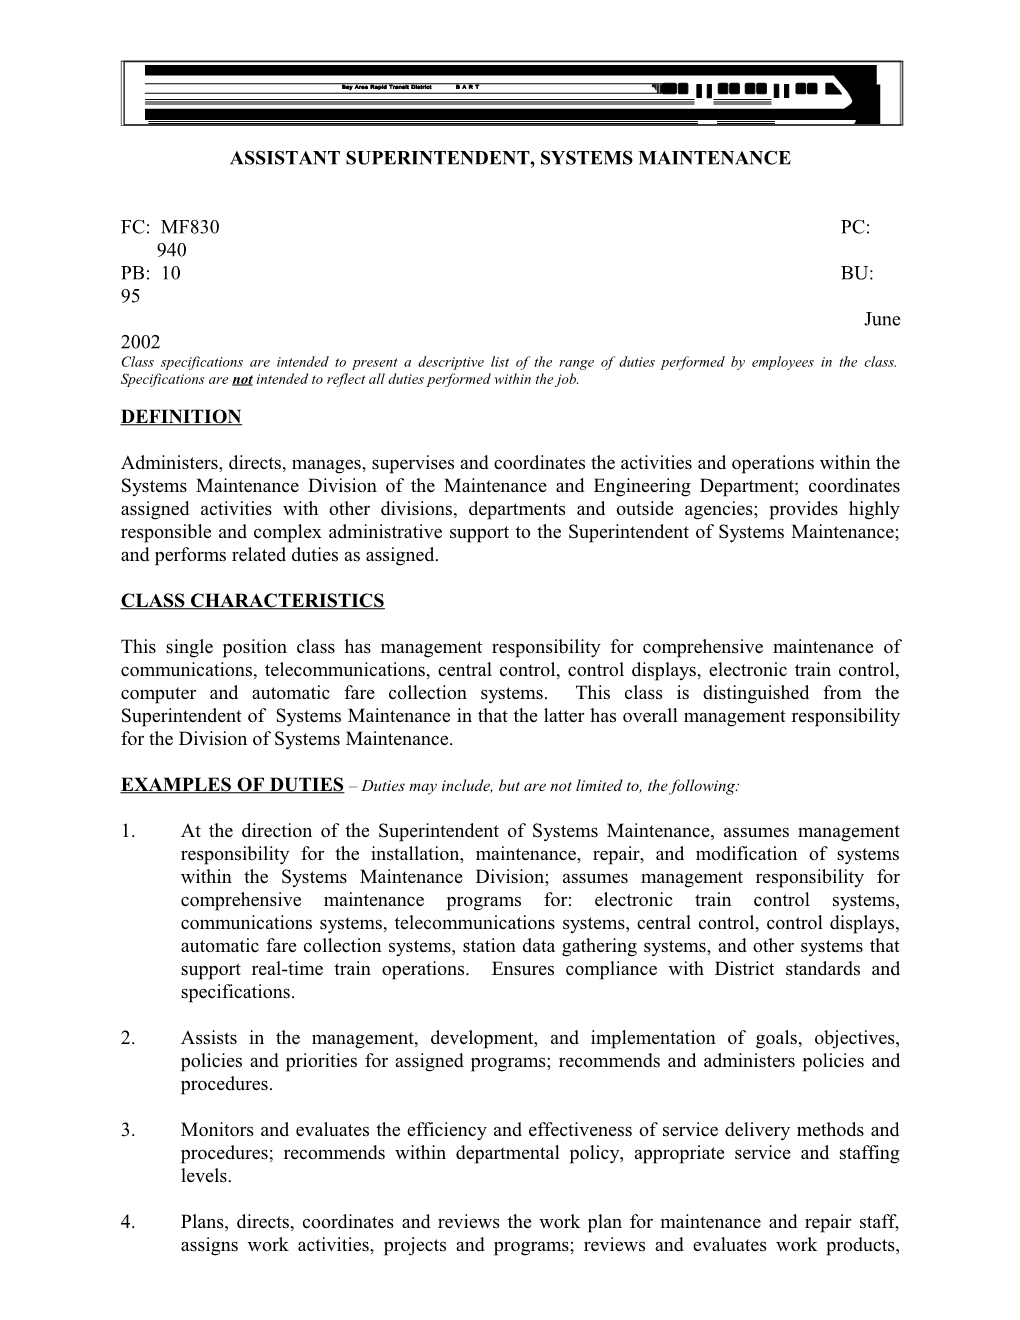 Assistant Superintendent, Systems Maintenance